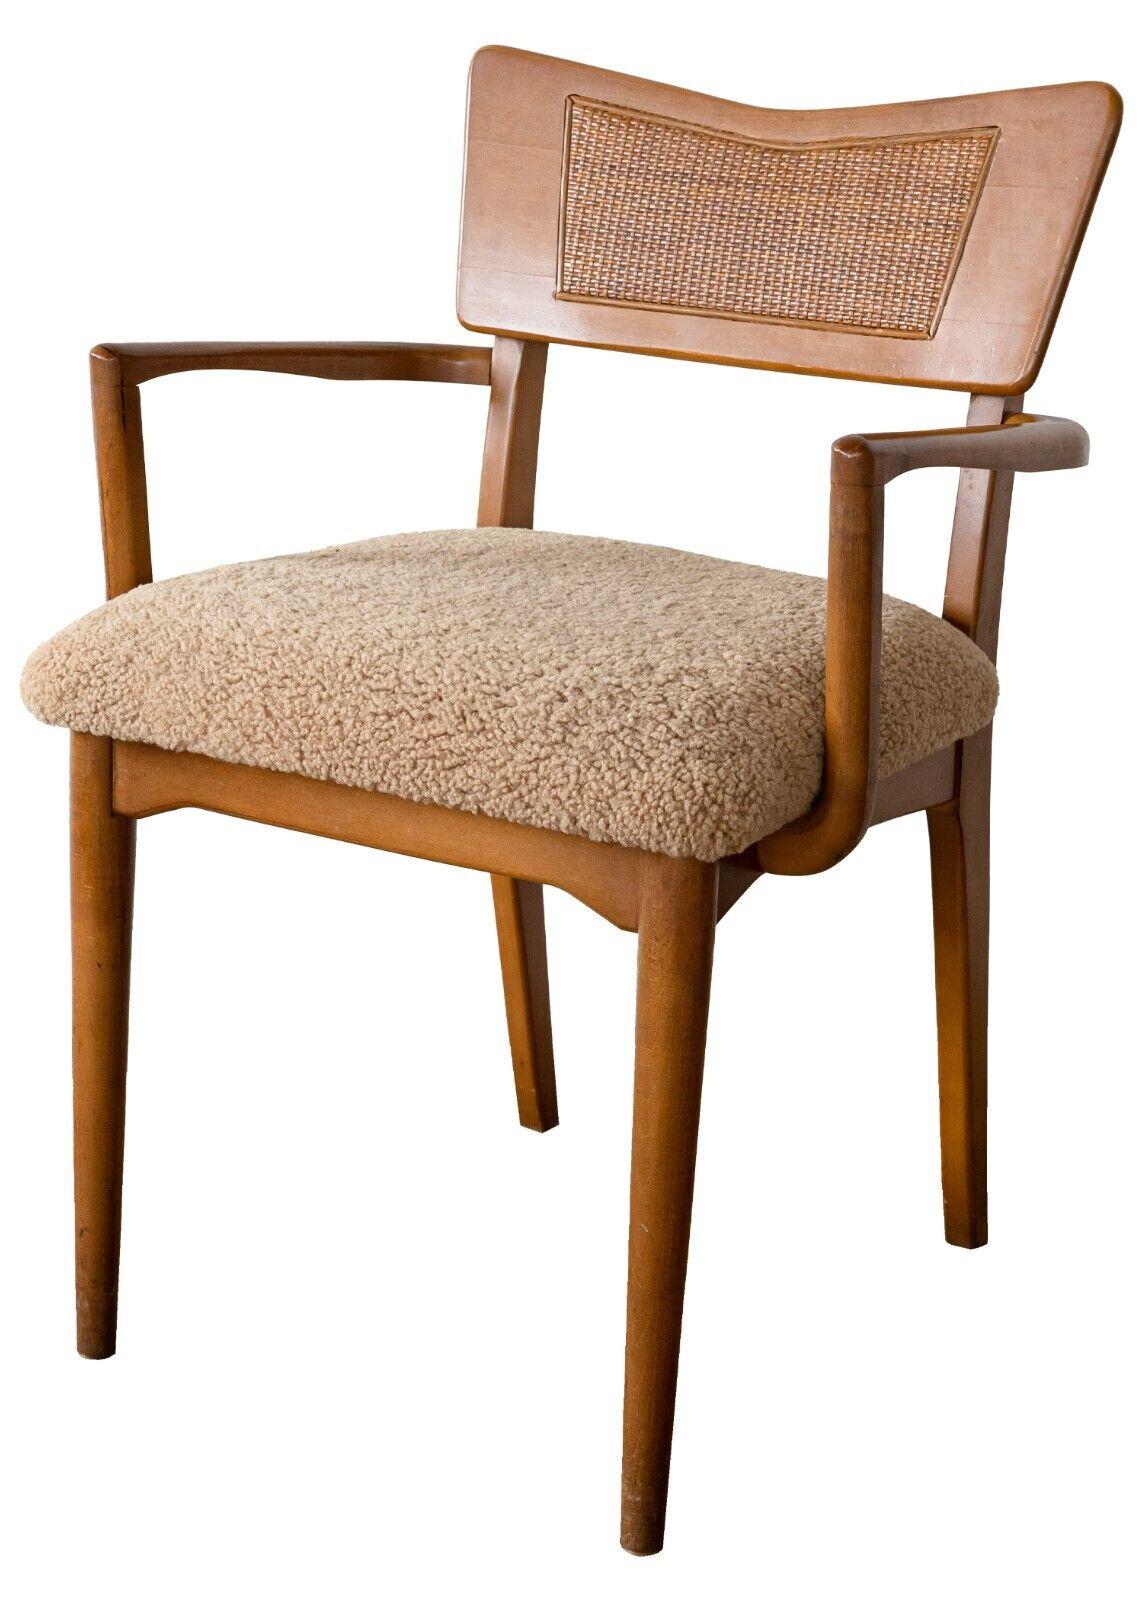 A pair of Mid-Century Modern Danish woven back walnut wood chairs. This marvelous pair of accent chairs are the perfect pick for any Danish mid century modern lover. These chairs feature a gorgeous woven seat back and a very cozy fleece seat